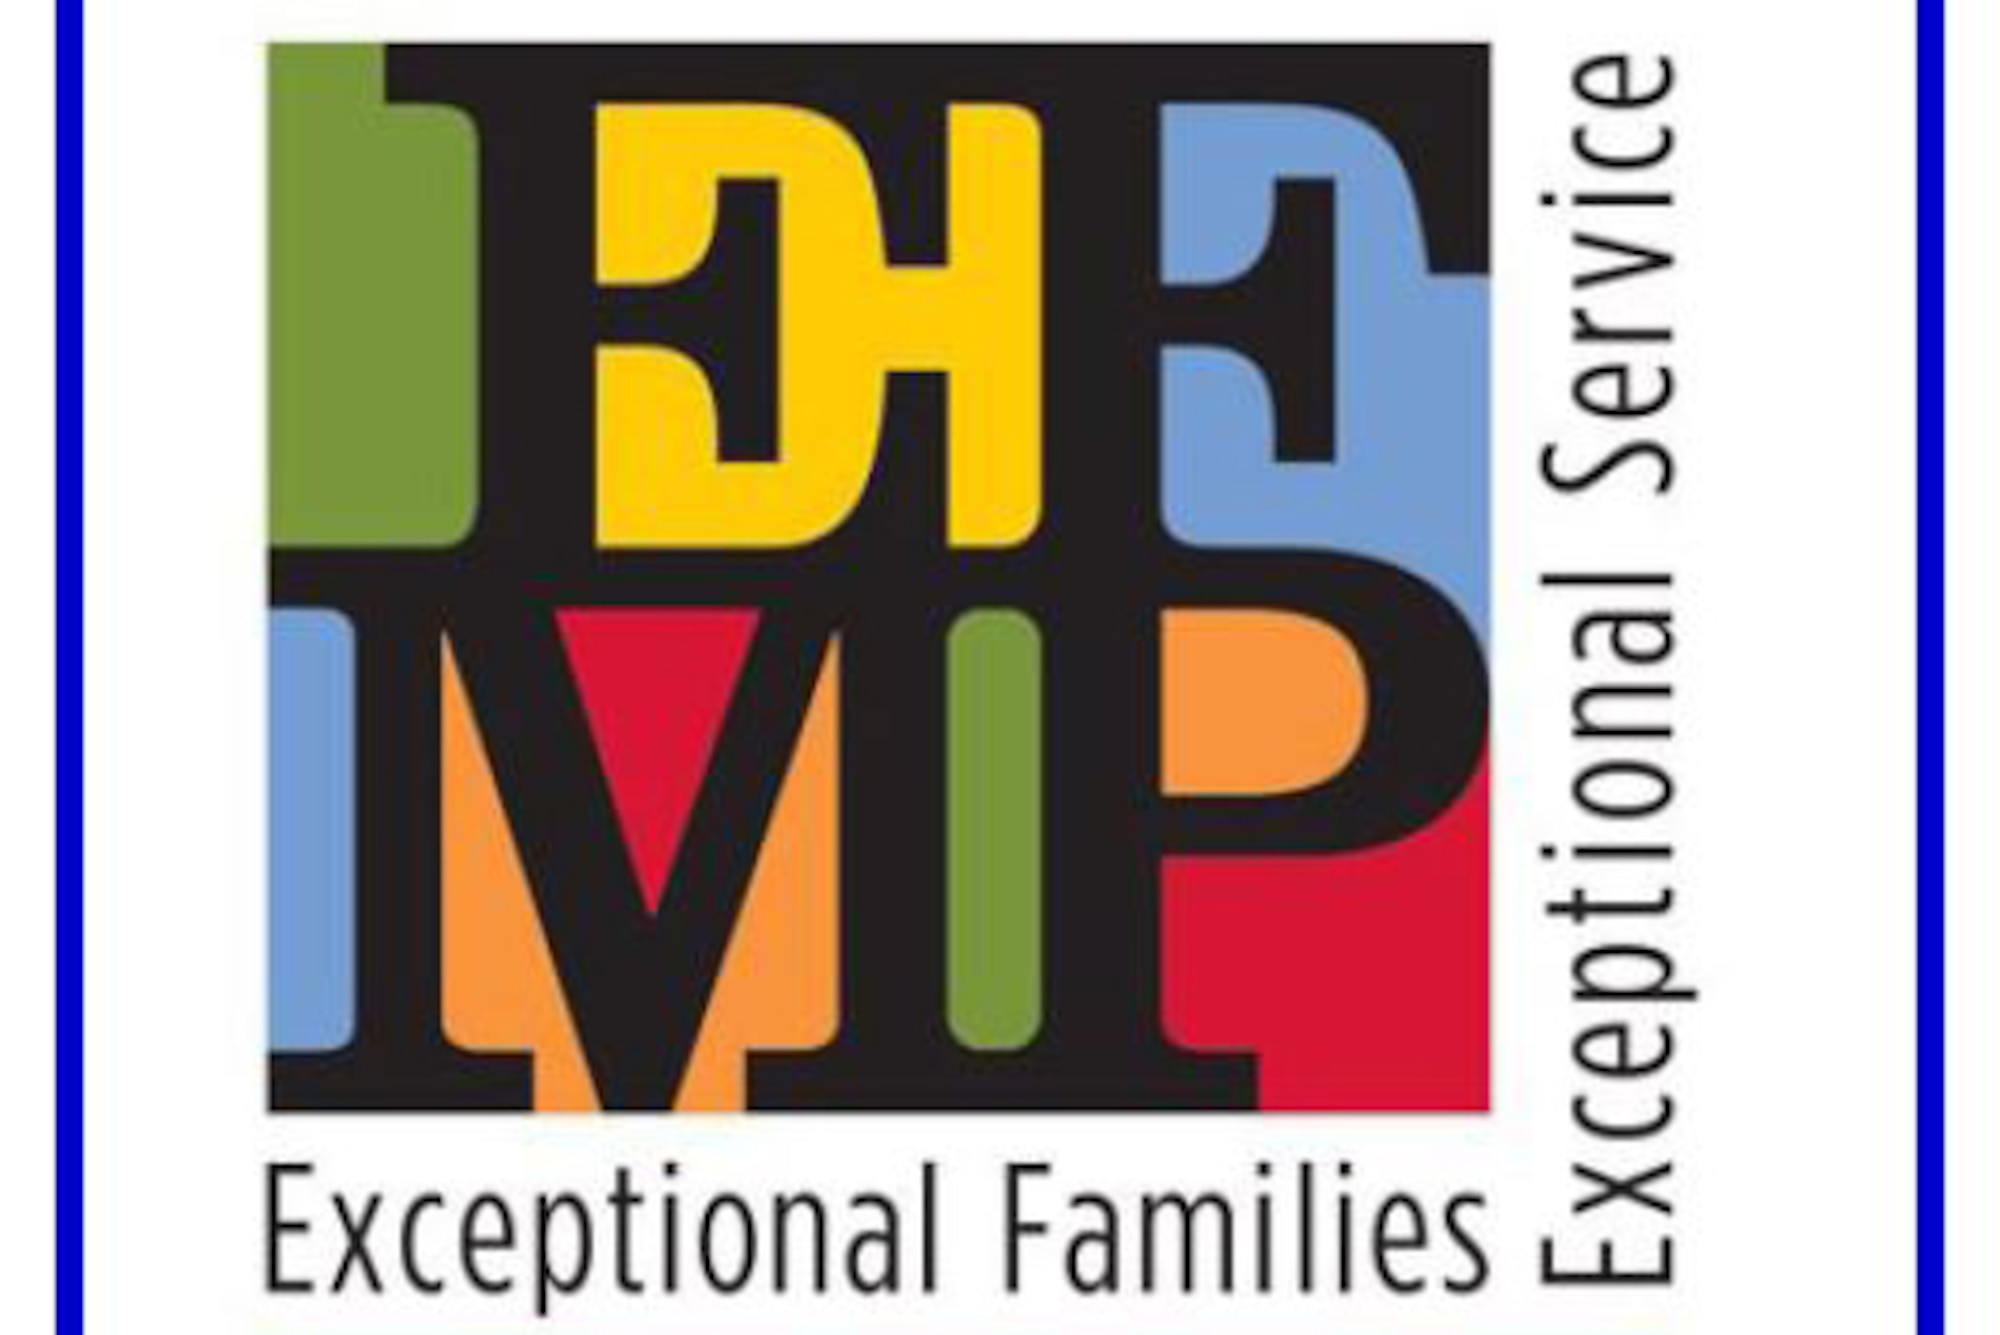 Military families who have special needs can get tailored, special support at Malmstrom Air Force Base, Mont., through a program designed by the Air Force called the Exceptional Family Member Program. EFMP has announced their local 2019 special events. (Graphic courtesy of Malmstrom Air Force Base Family Support.)